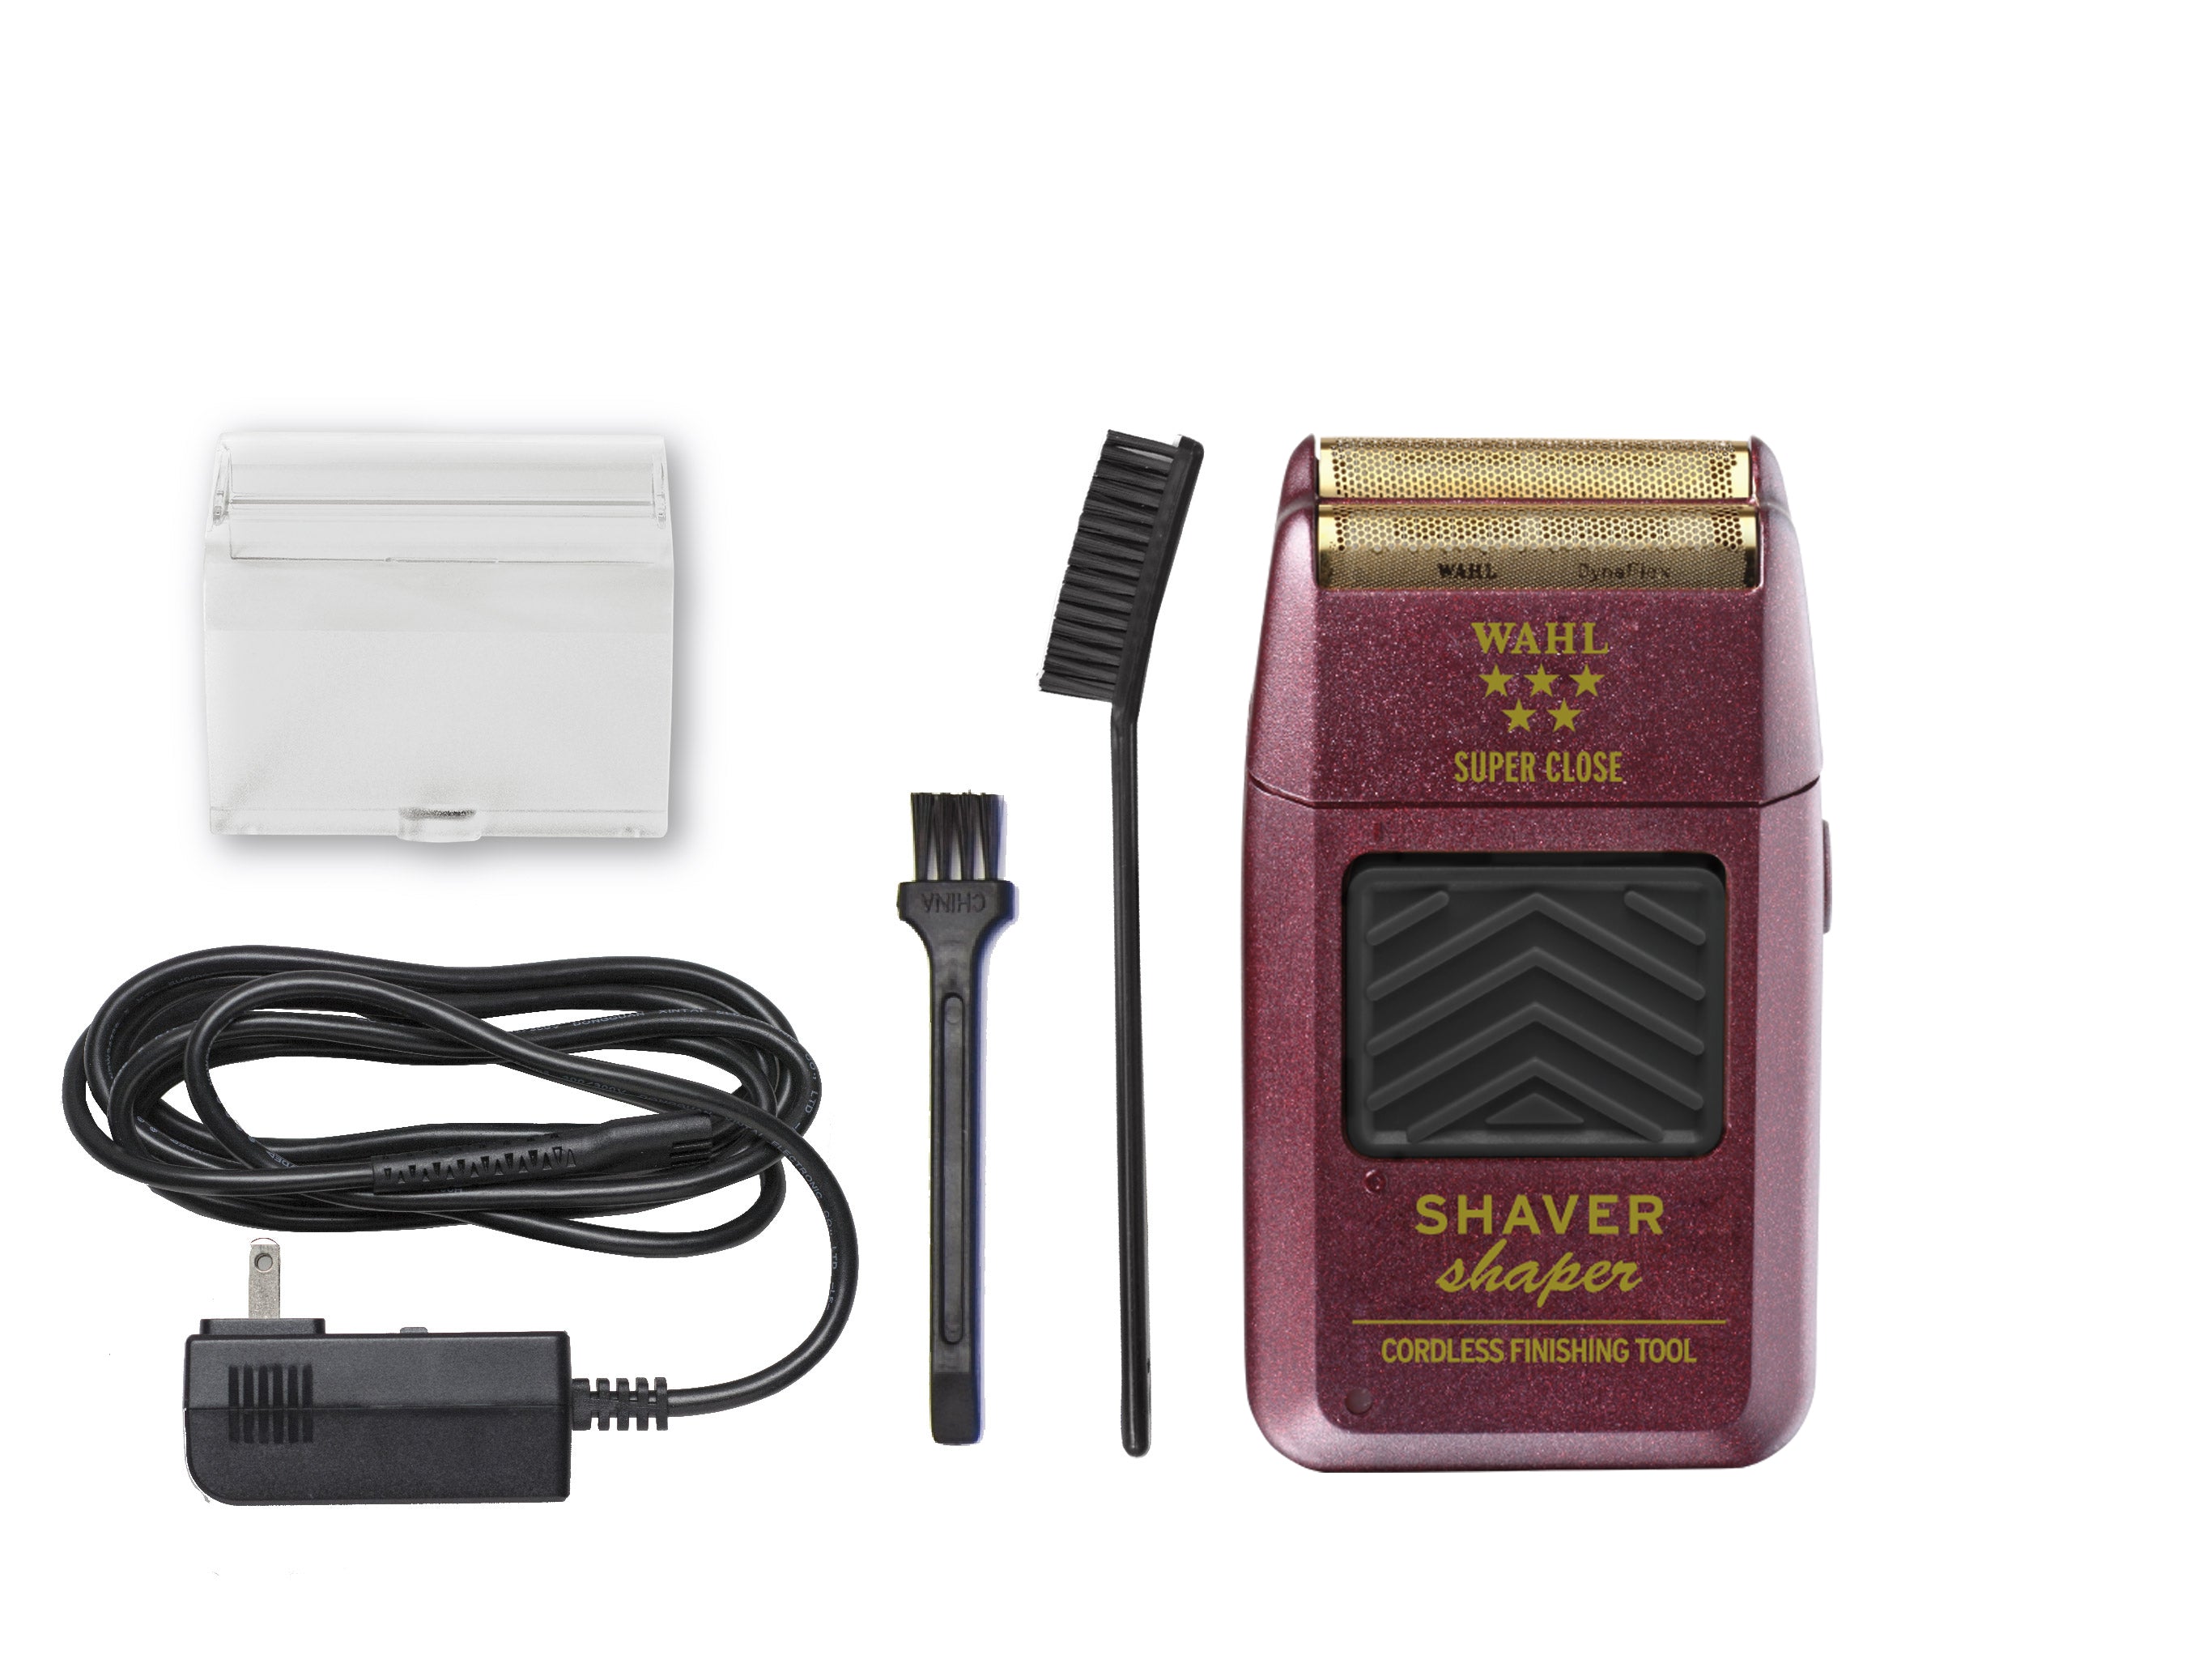 Wahl 5 Star Shaver / Shaper - Creata Beauty - Professional Beauty Products